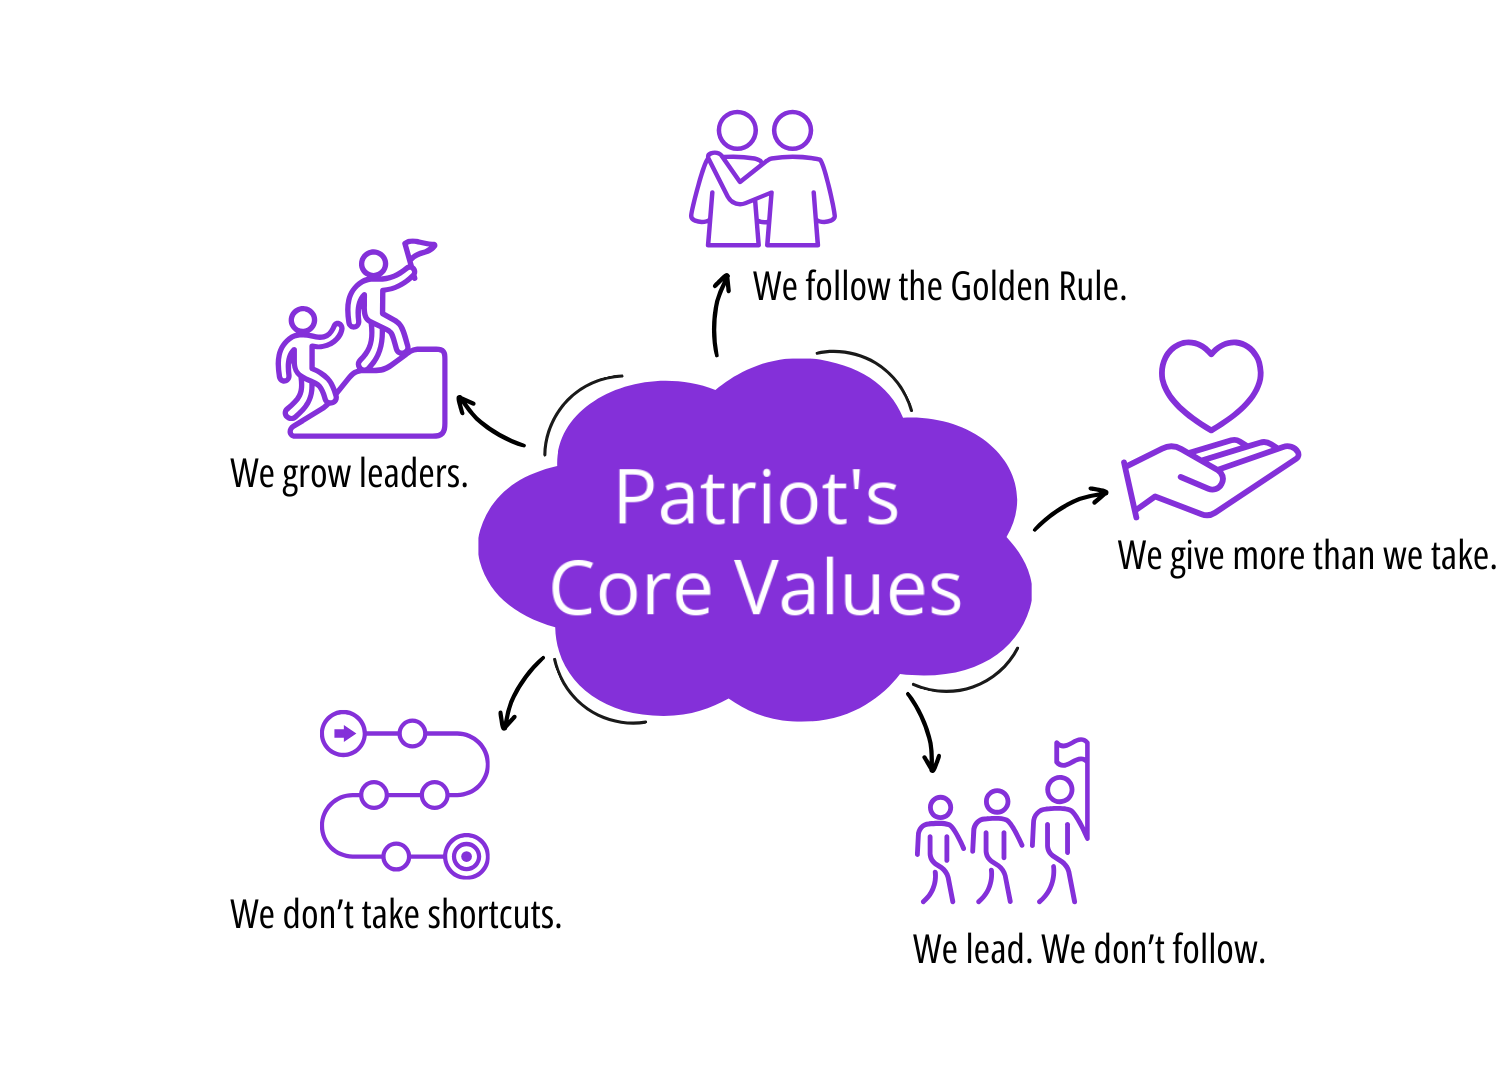 Patriot's Core Values: 1. We Give More Than We Take 2. We Lead We Don’t Follow 3. We Don’t Take Shortcuts, 4. We Follow The Golden Rule, and 5. We Grow Leaders.